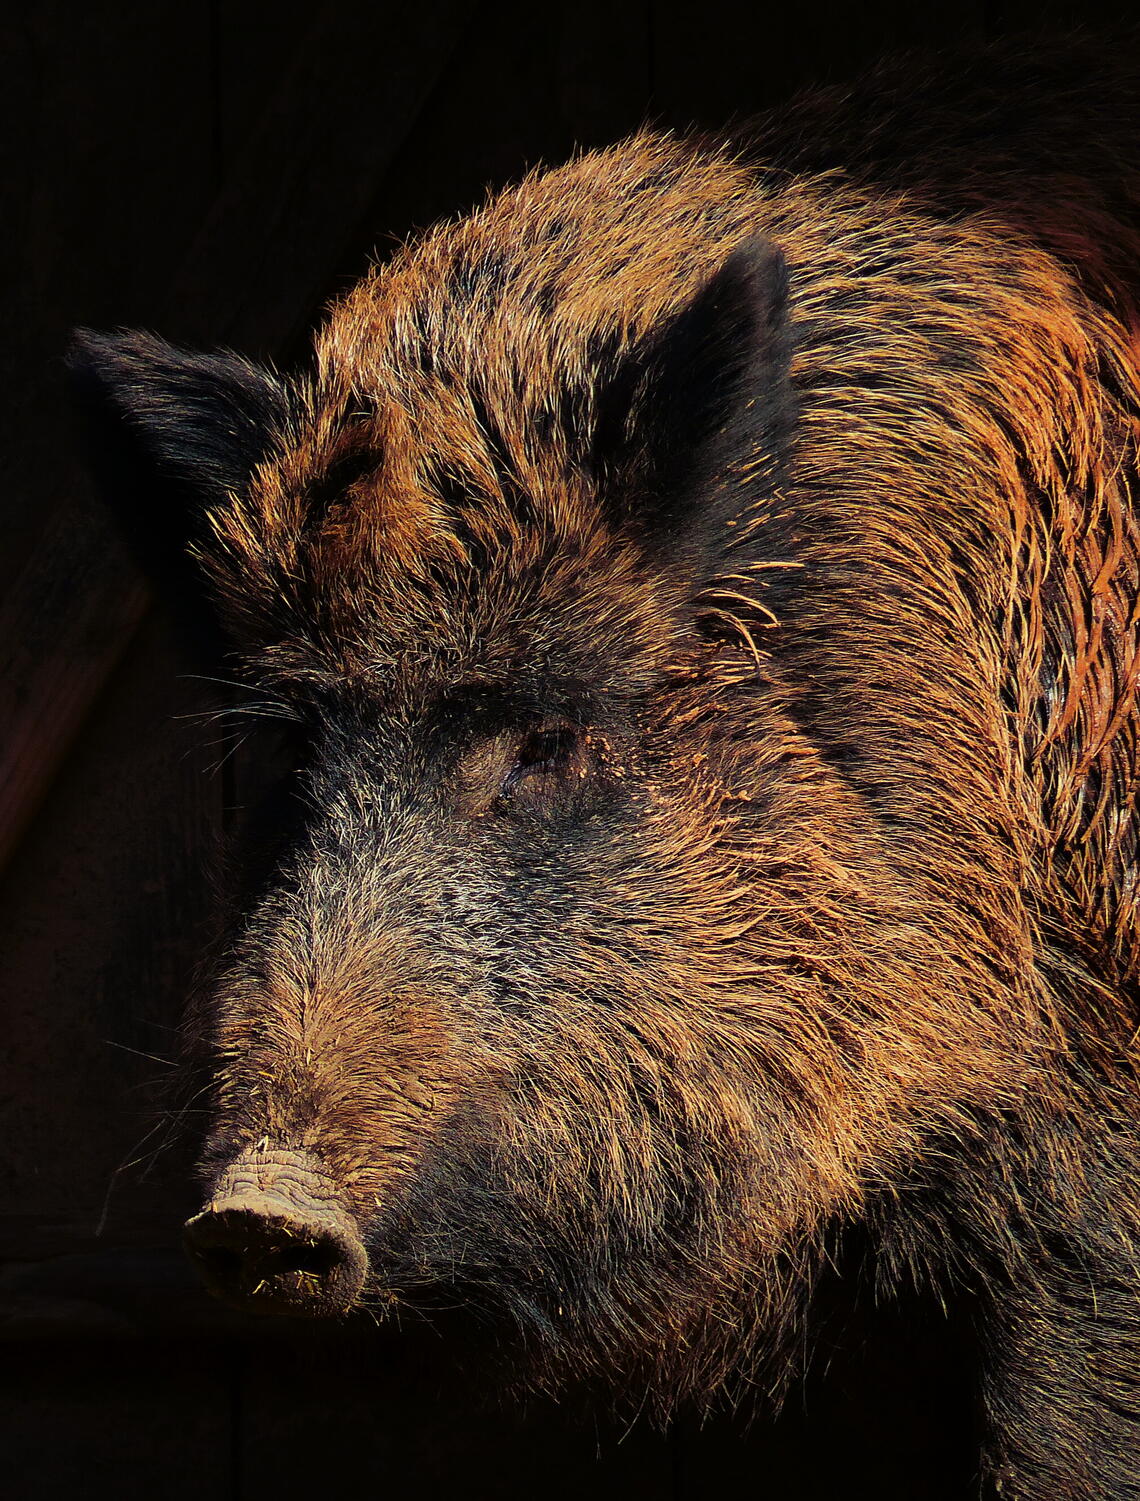 In Alberta, wild boars are considered an invasive pest